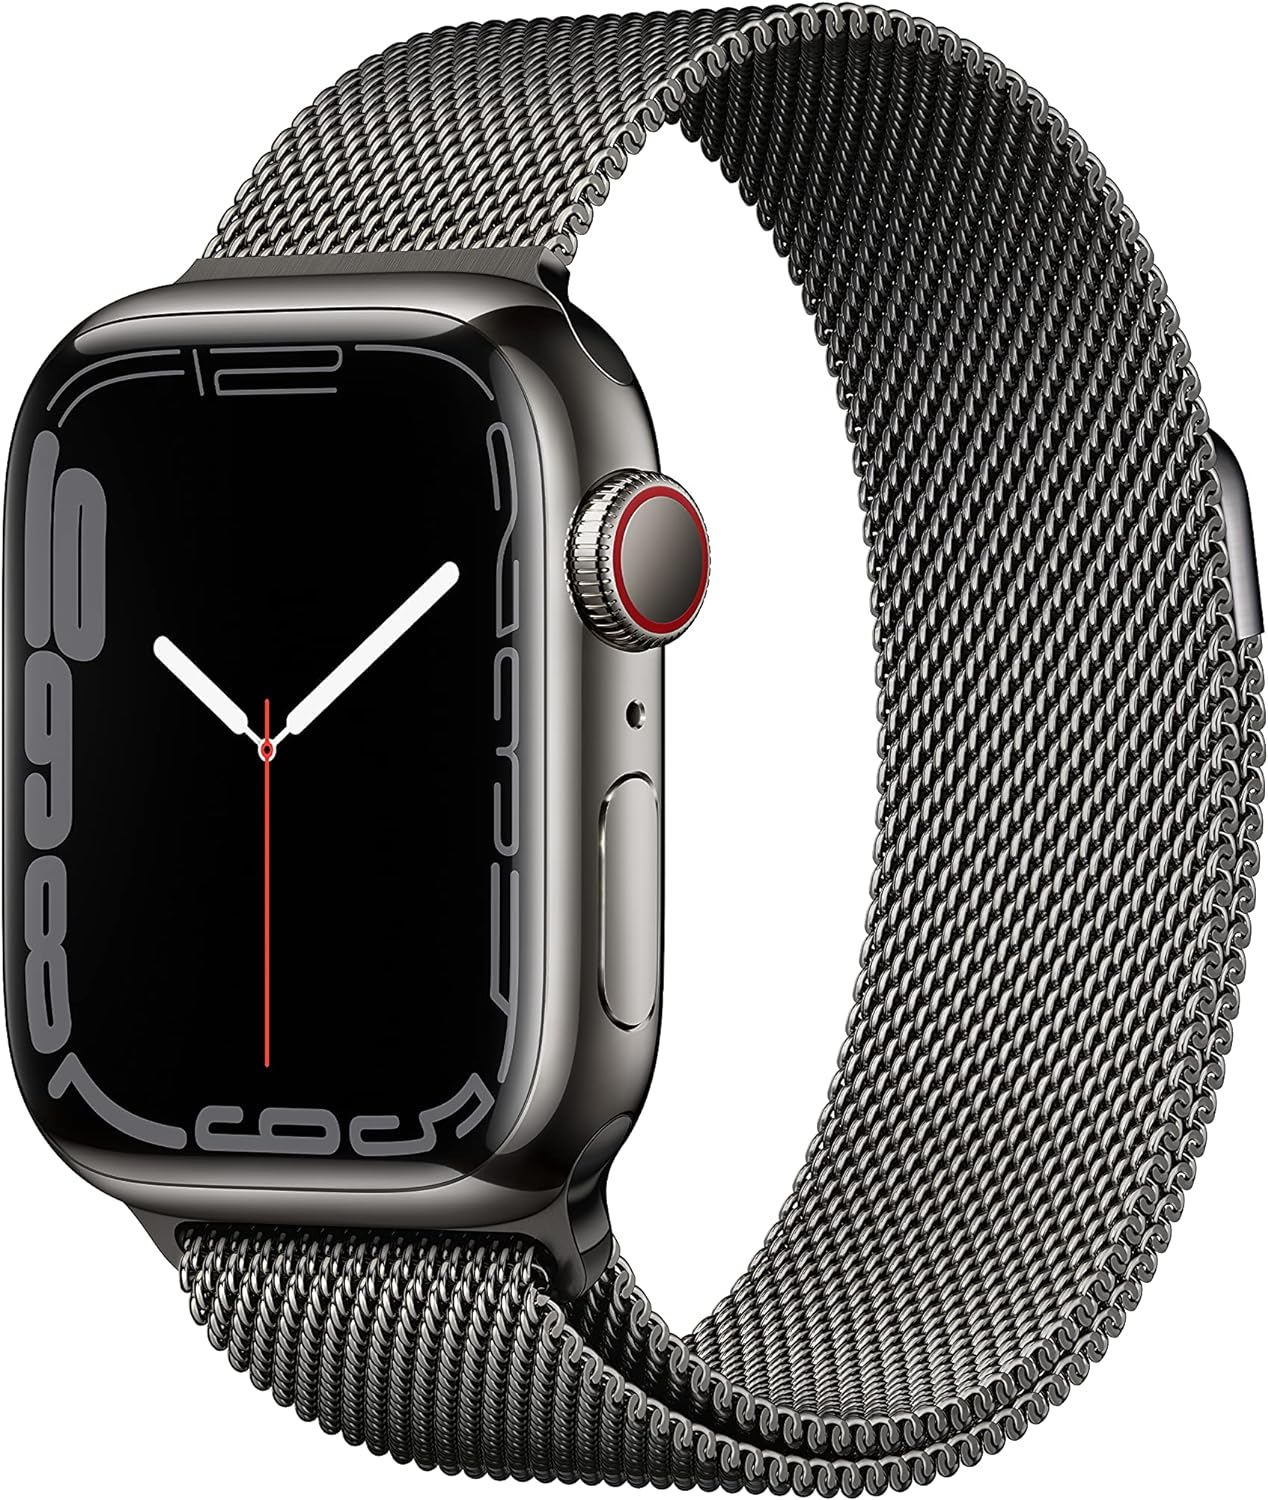 Apple Watch Series 7 [GPS + Cellular 41mm] Smart Watch w/Graphite Stainless Steel Case with Graphite Milanese Loop: Detailed Review & Recommendations